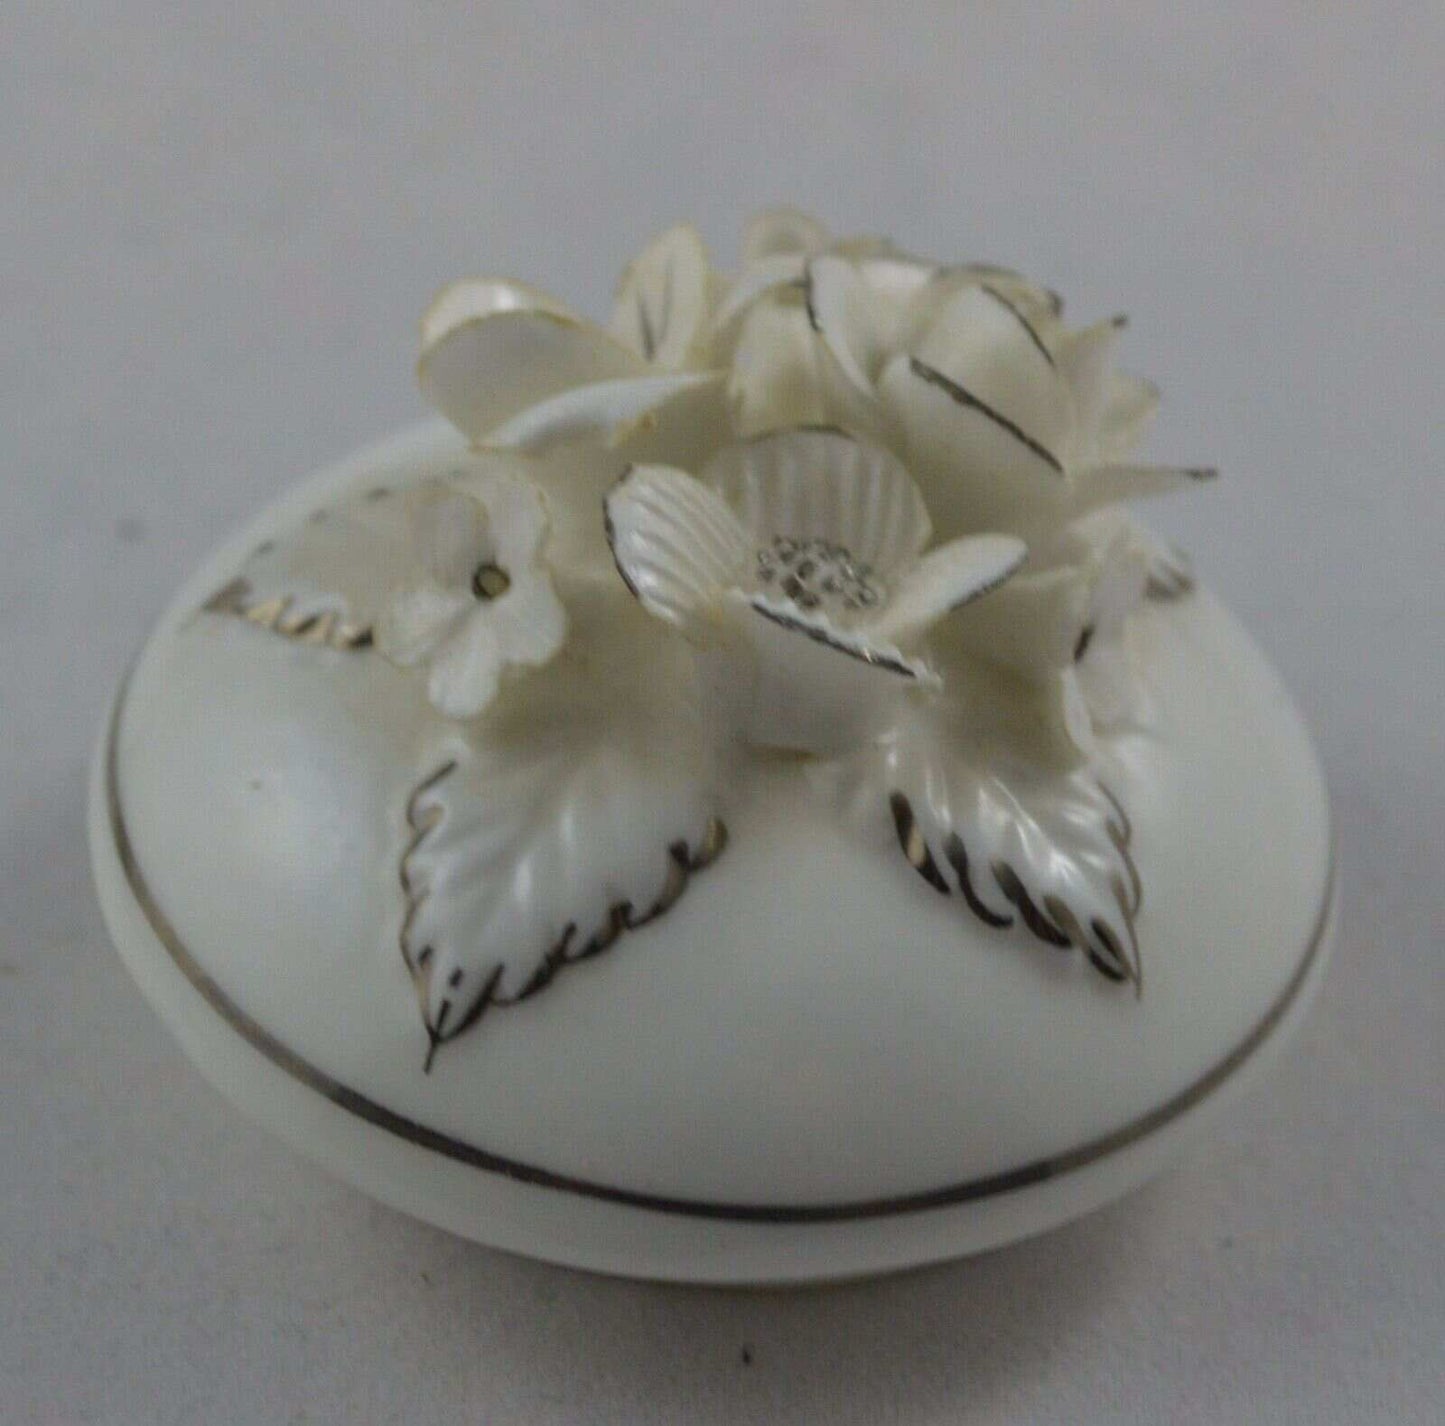 Small white flowers edged in gold gilding adorn the lid.